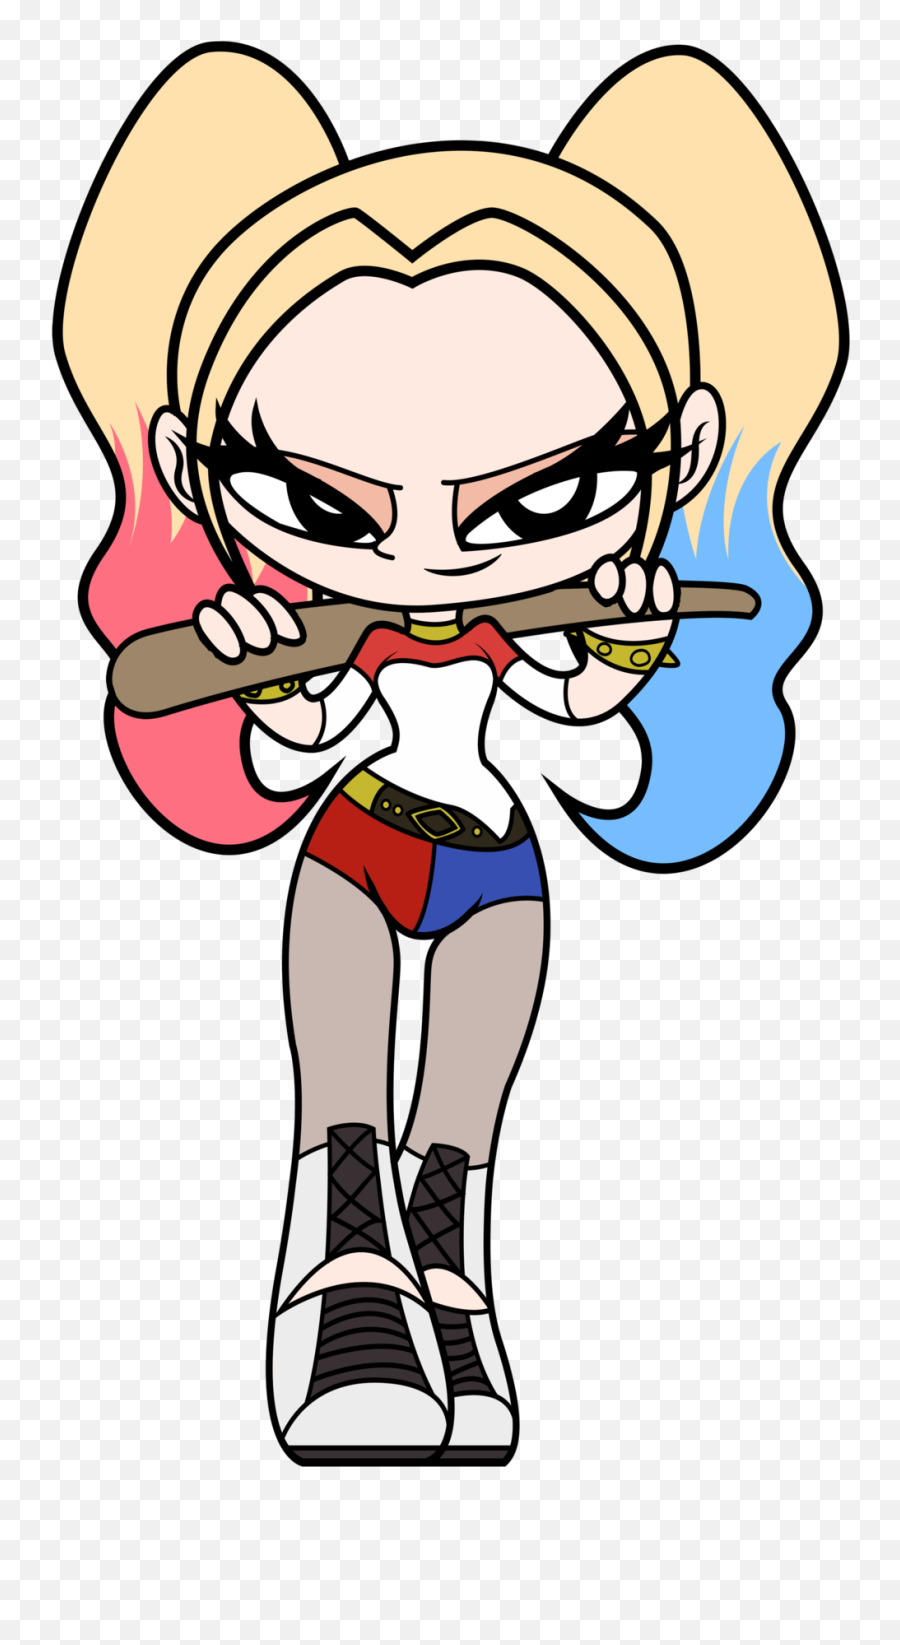 Harley Quinn Suicide Squad Clipart - Harley Quinn Suicide Squad Cartoon Emoji,Harley Quinn Emoji